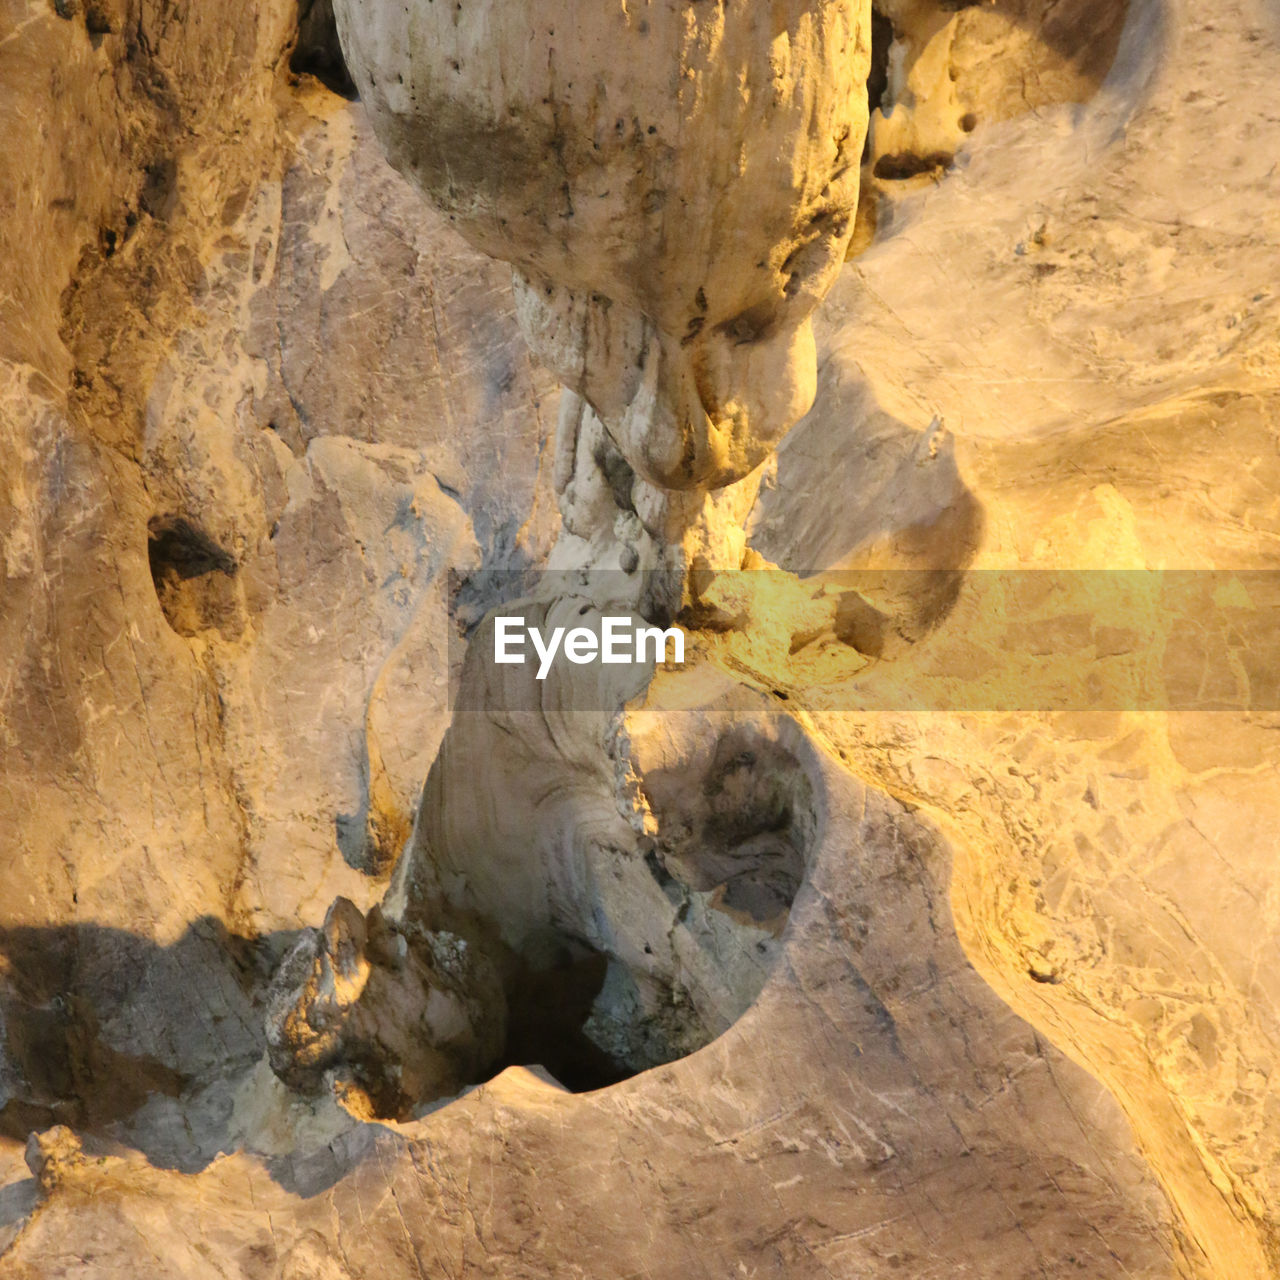 A gnome below a stalactite is an abstract dripstone shape on flowing stone in a cave wall.